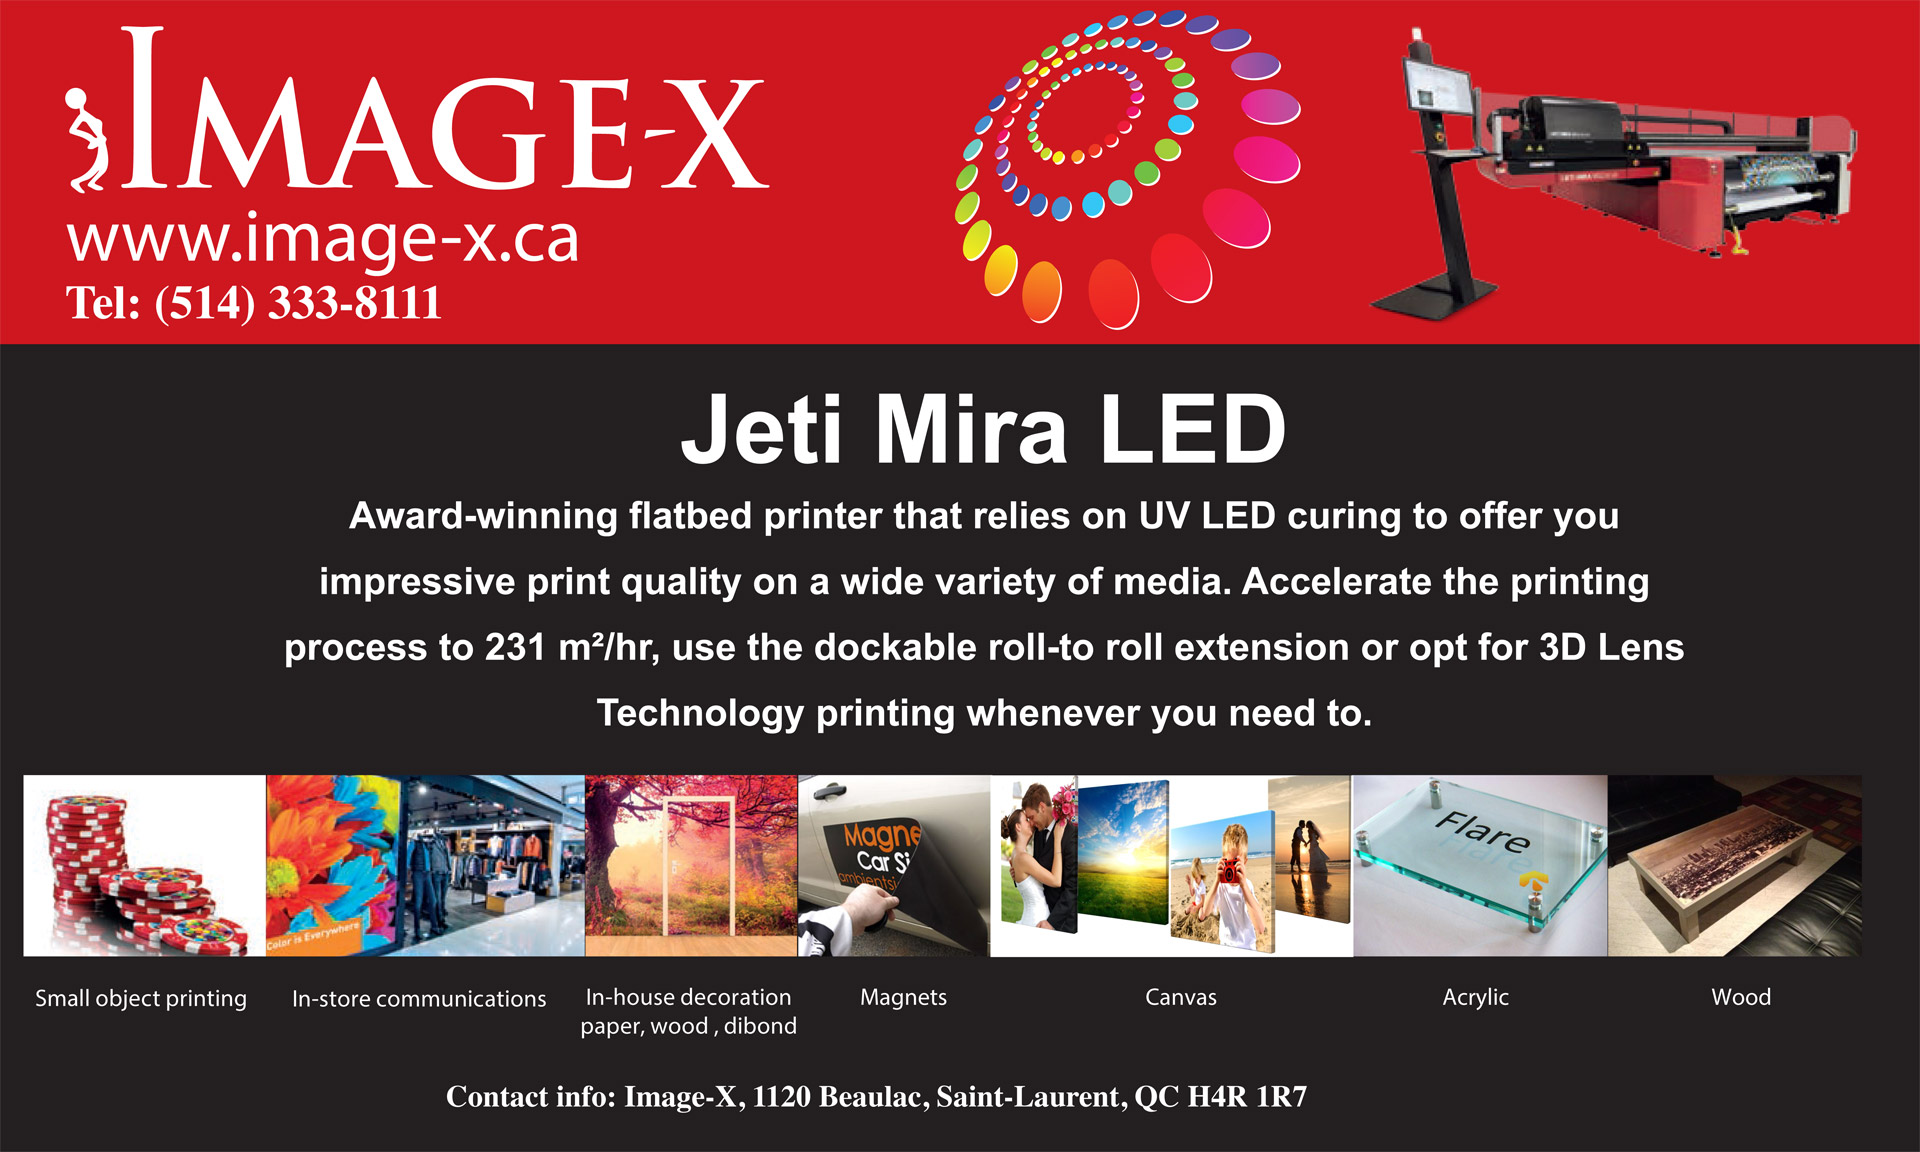 Image-X your source for all your printing needs